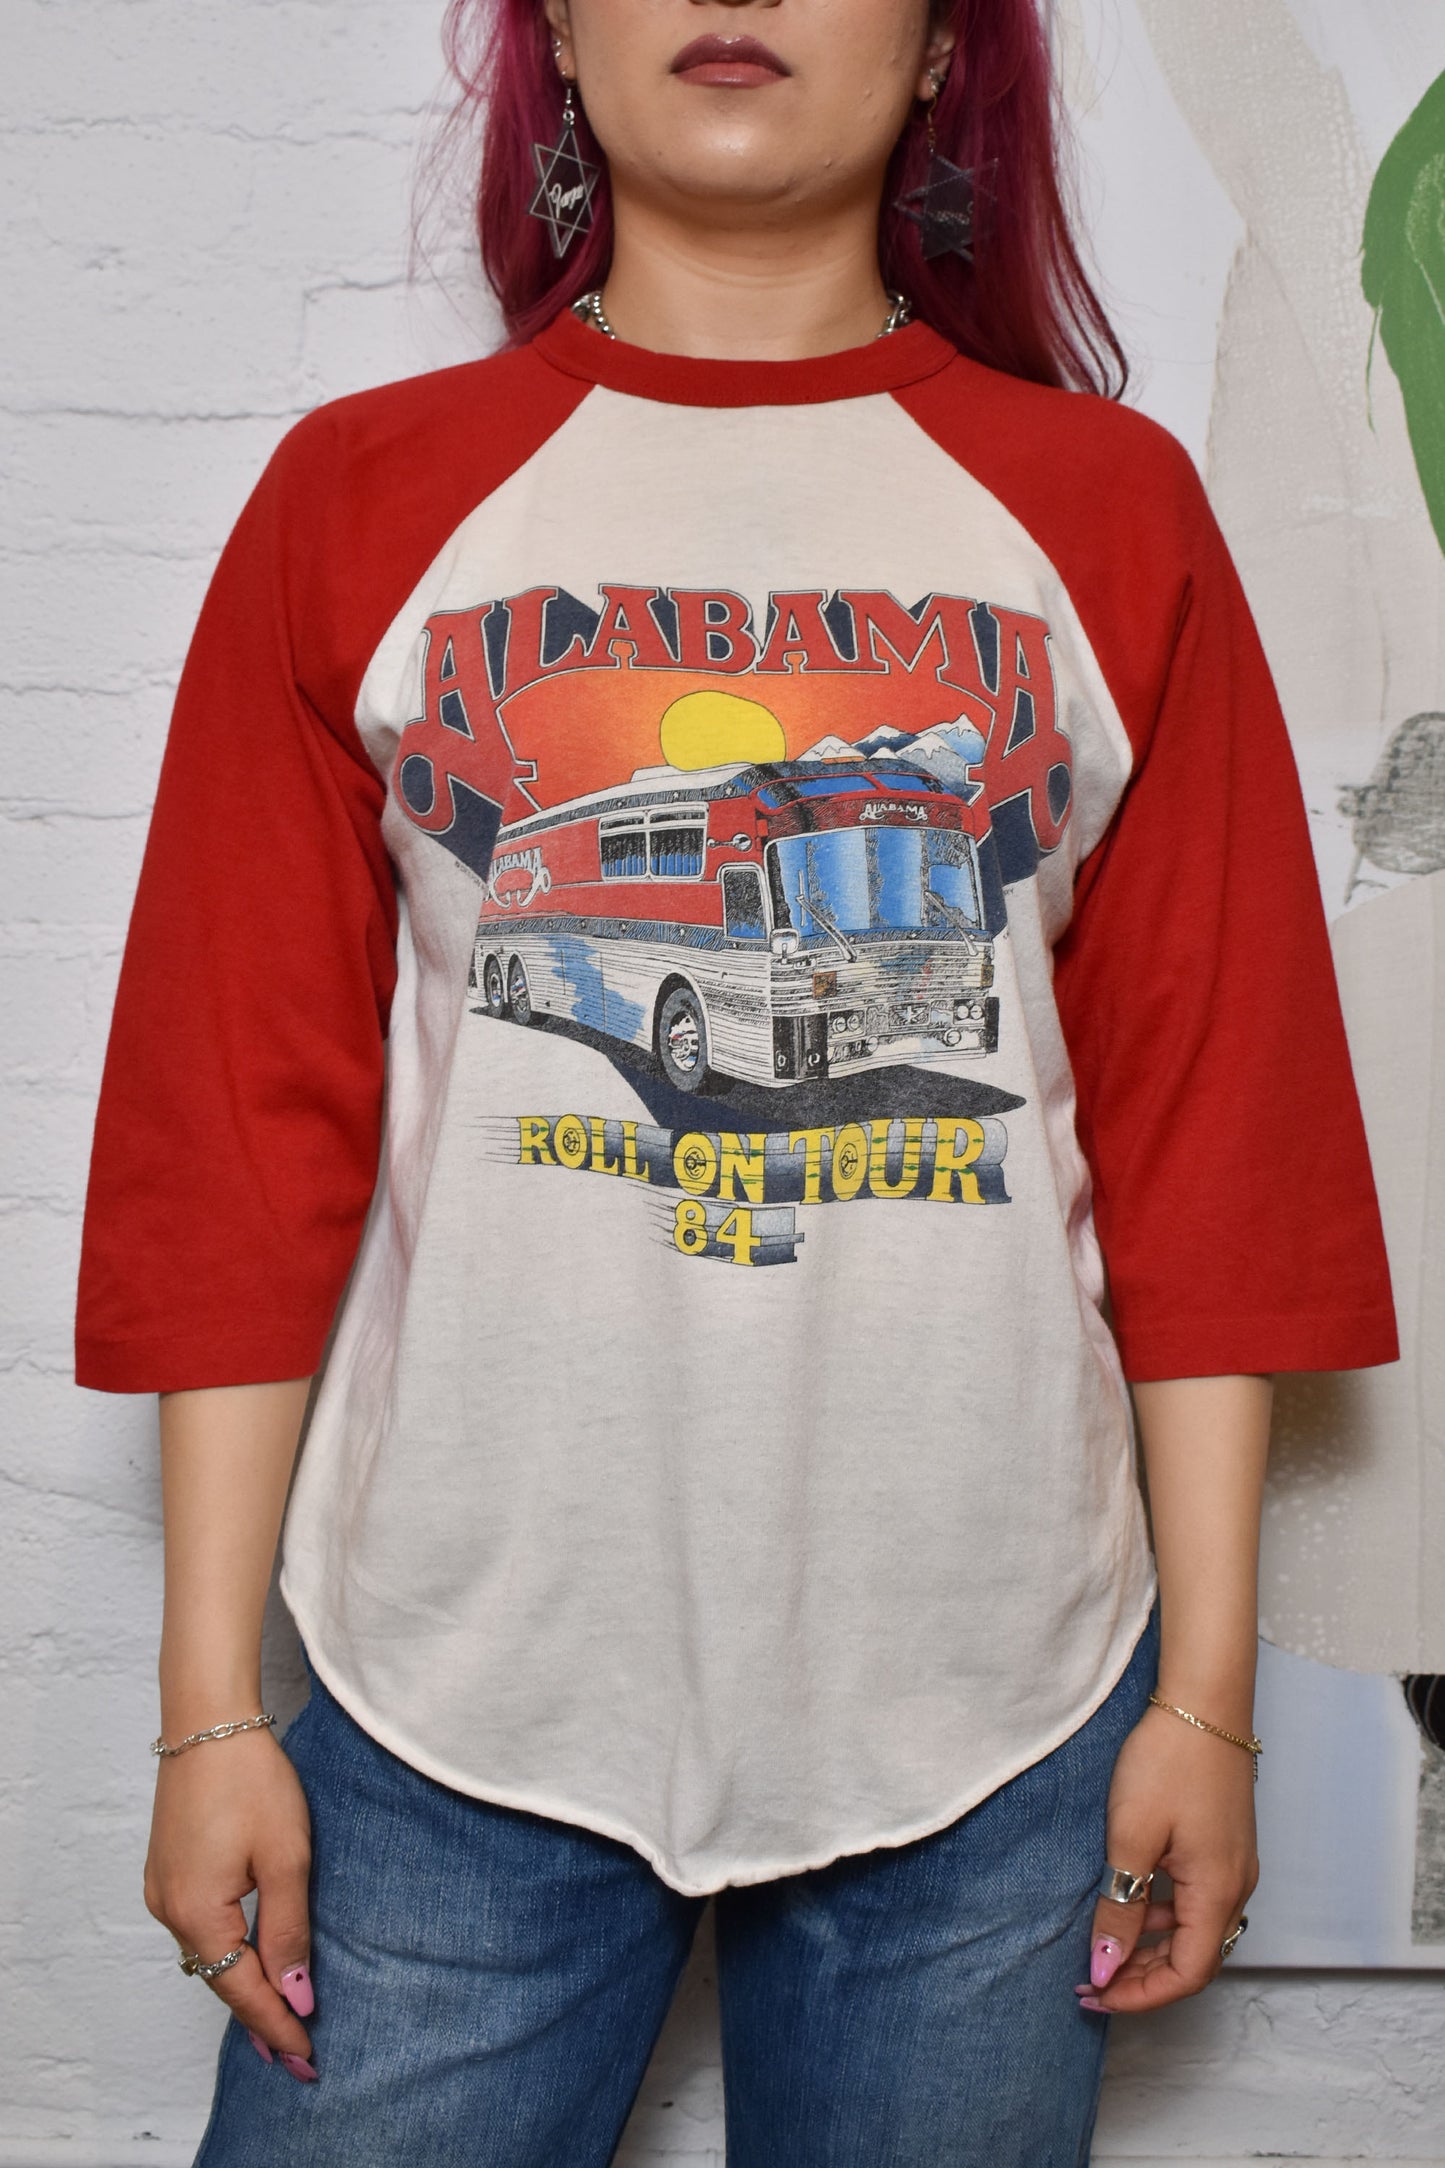 Vintage 1984 Alabama Roll On Tour T-shirt. 3/4 Red Sleeve